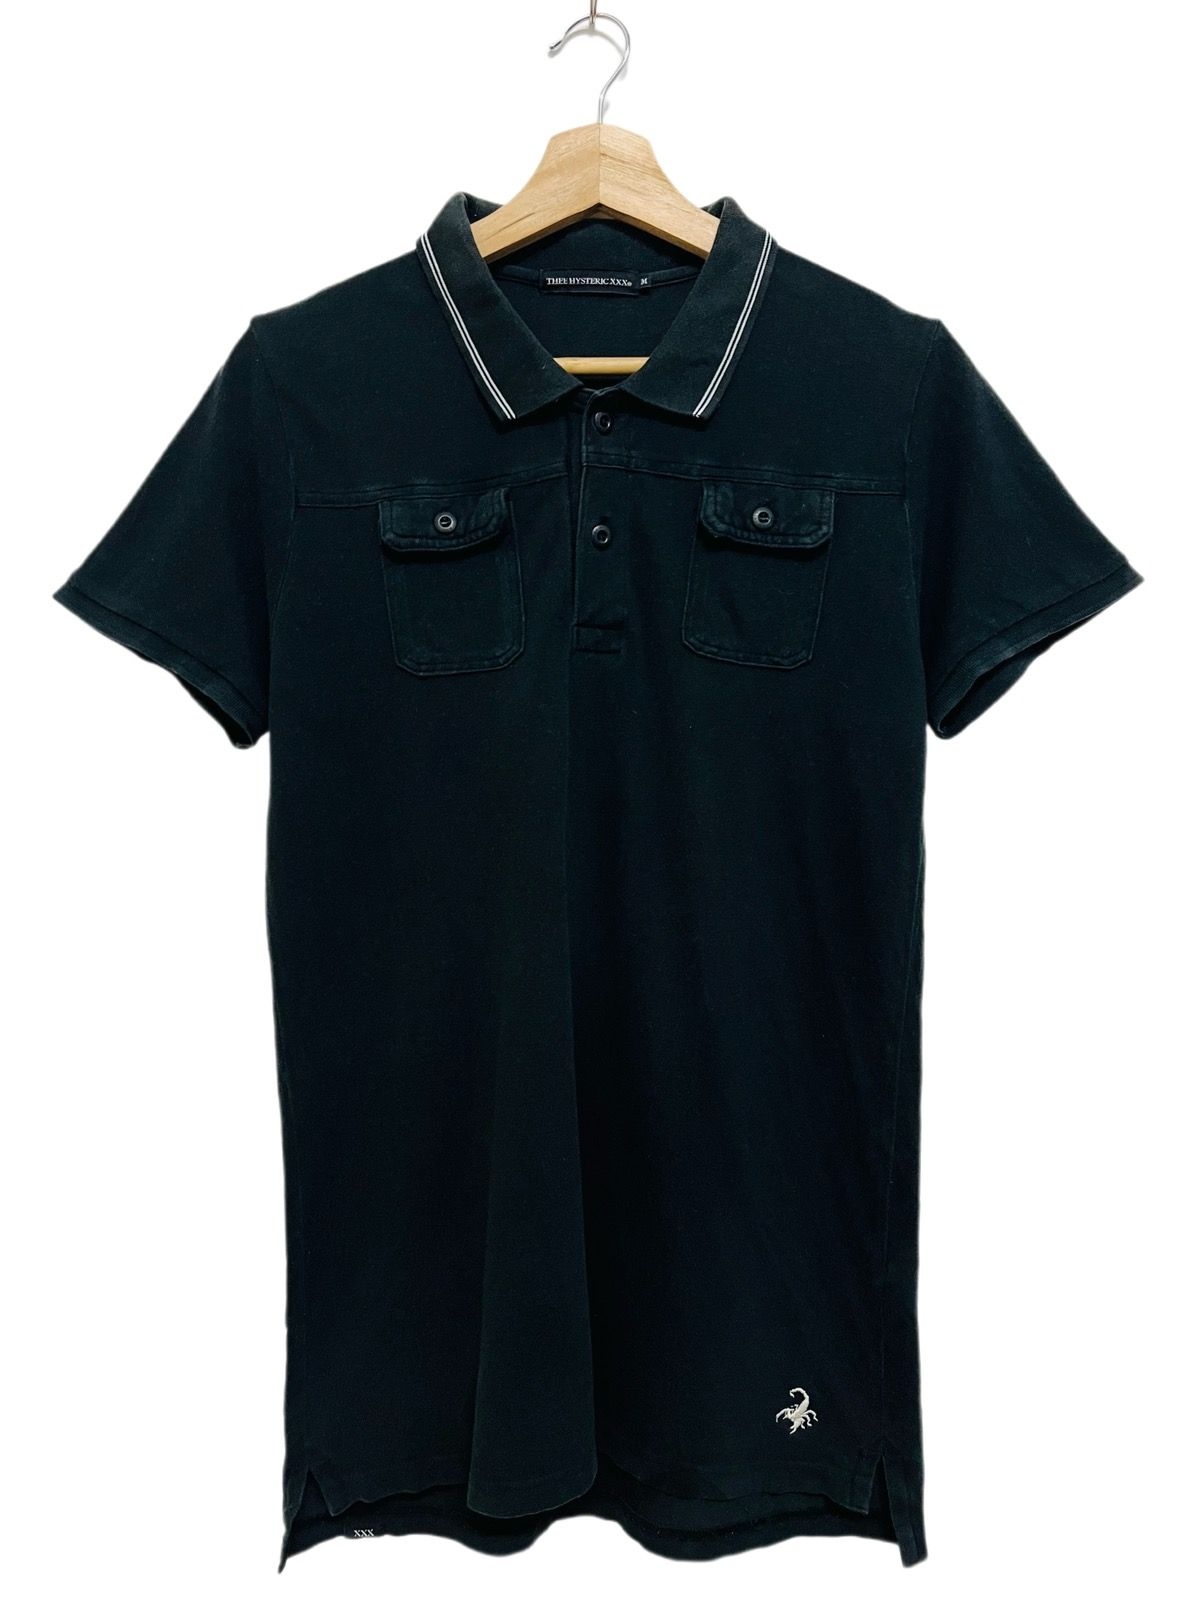 Hysteric Glamour Polo shirt - 1